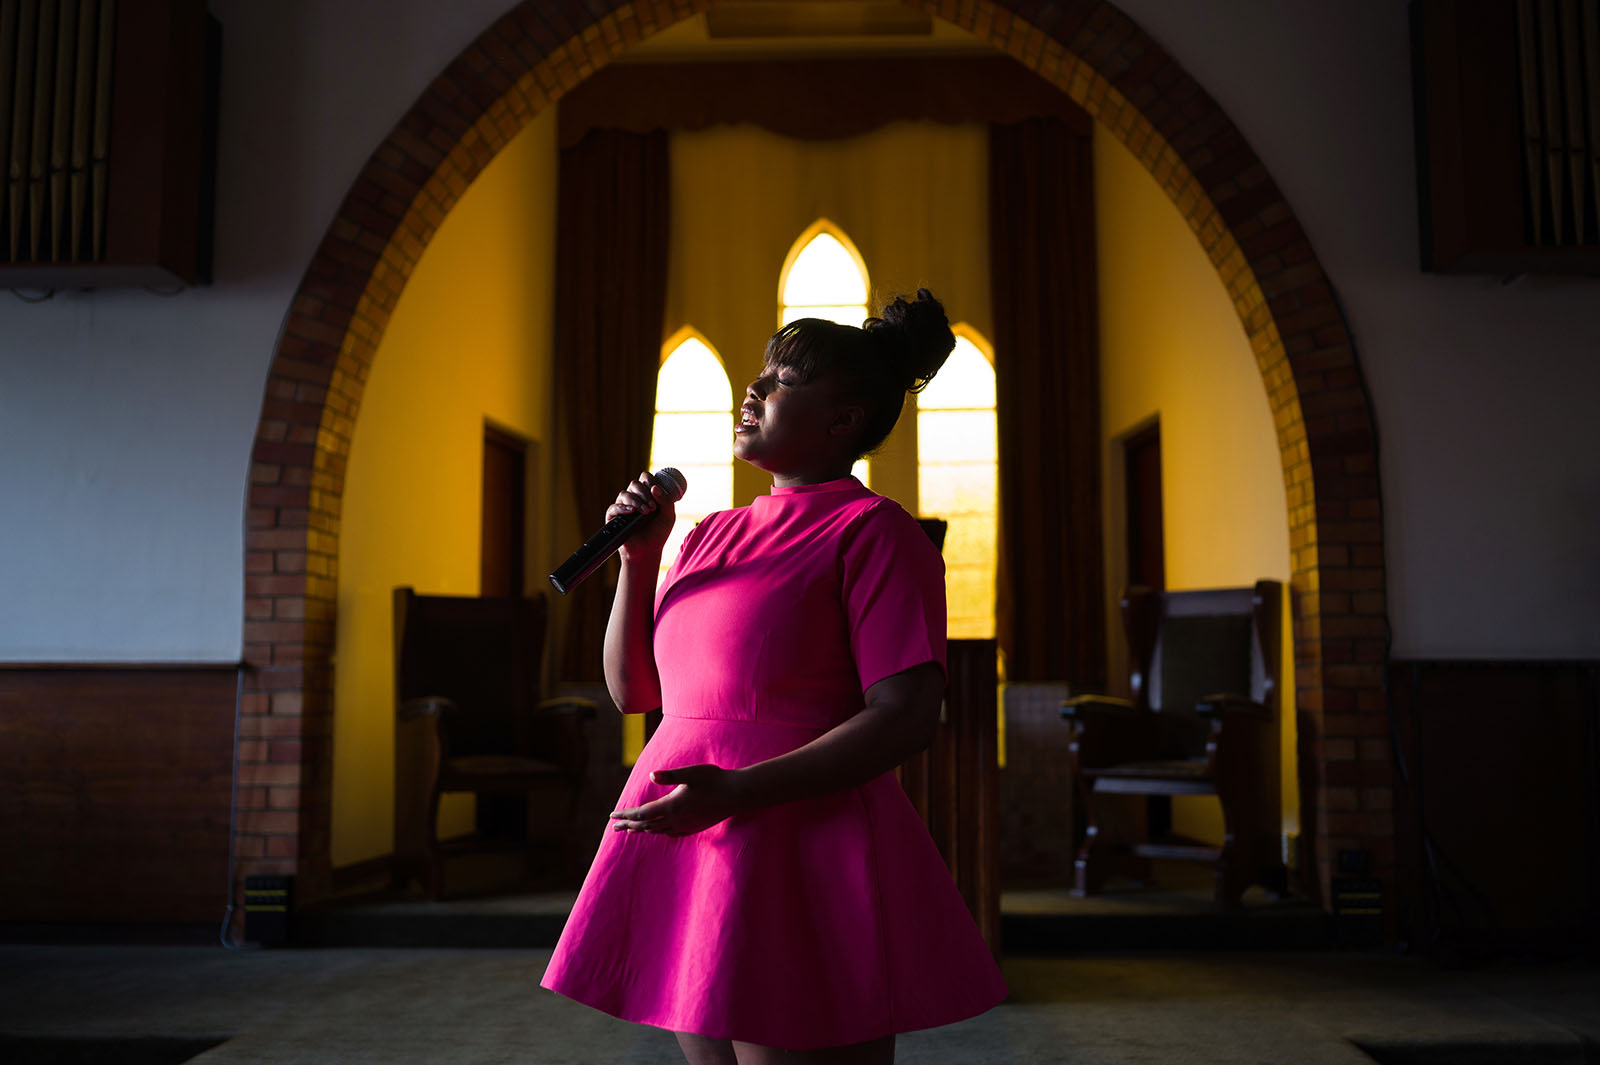 A woman in bright pink sings in a church.